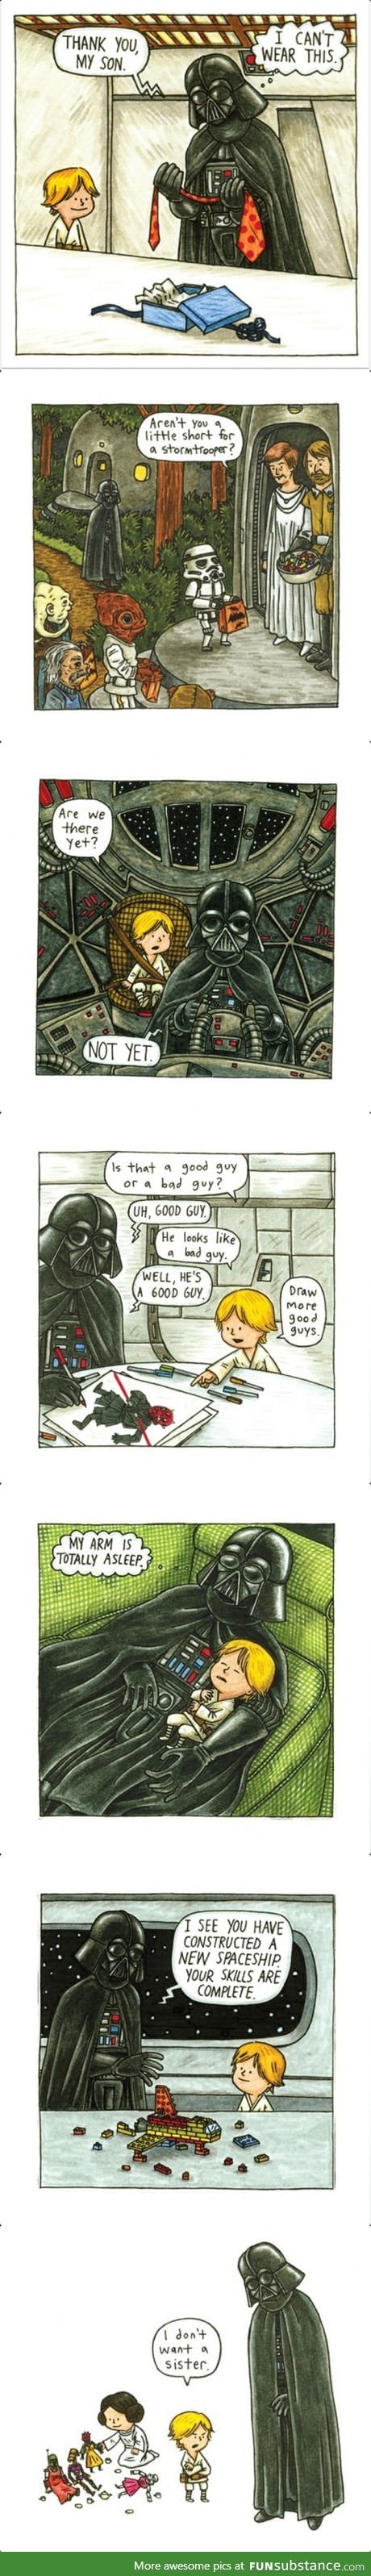 Some Darth Vader and Son! :D